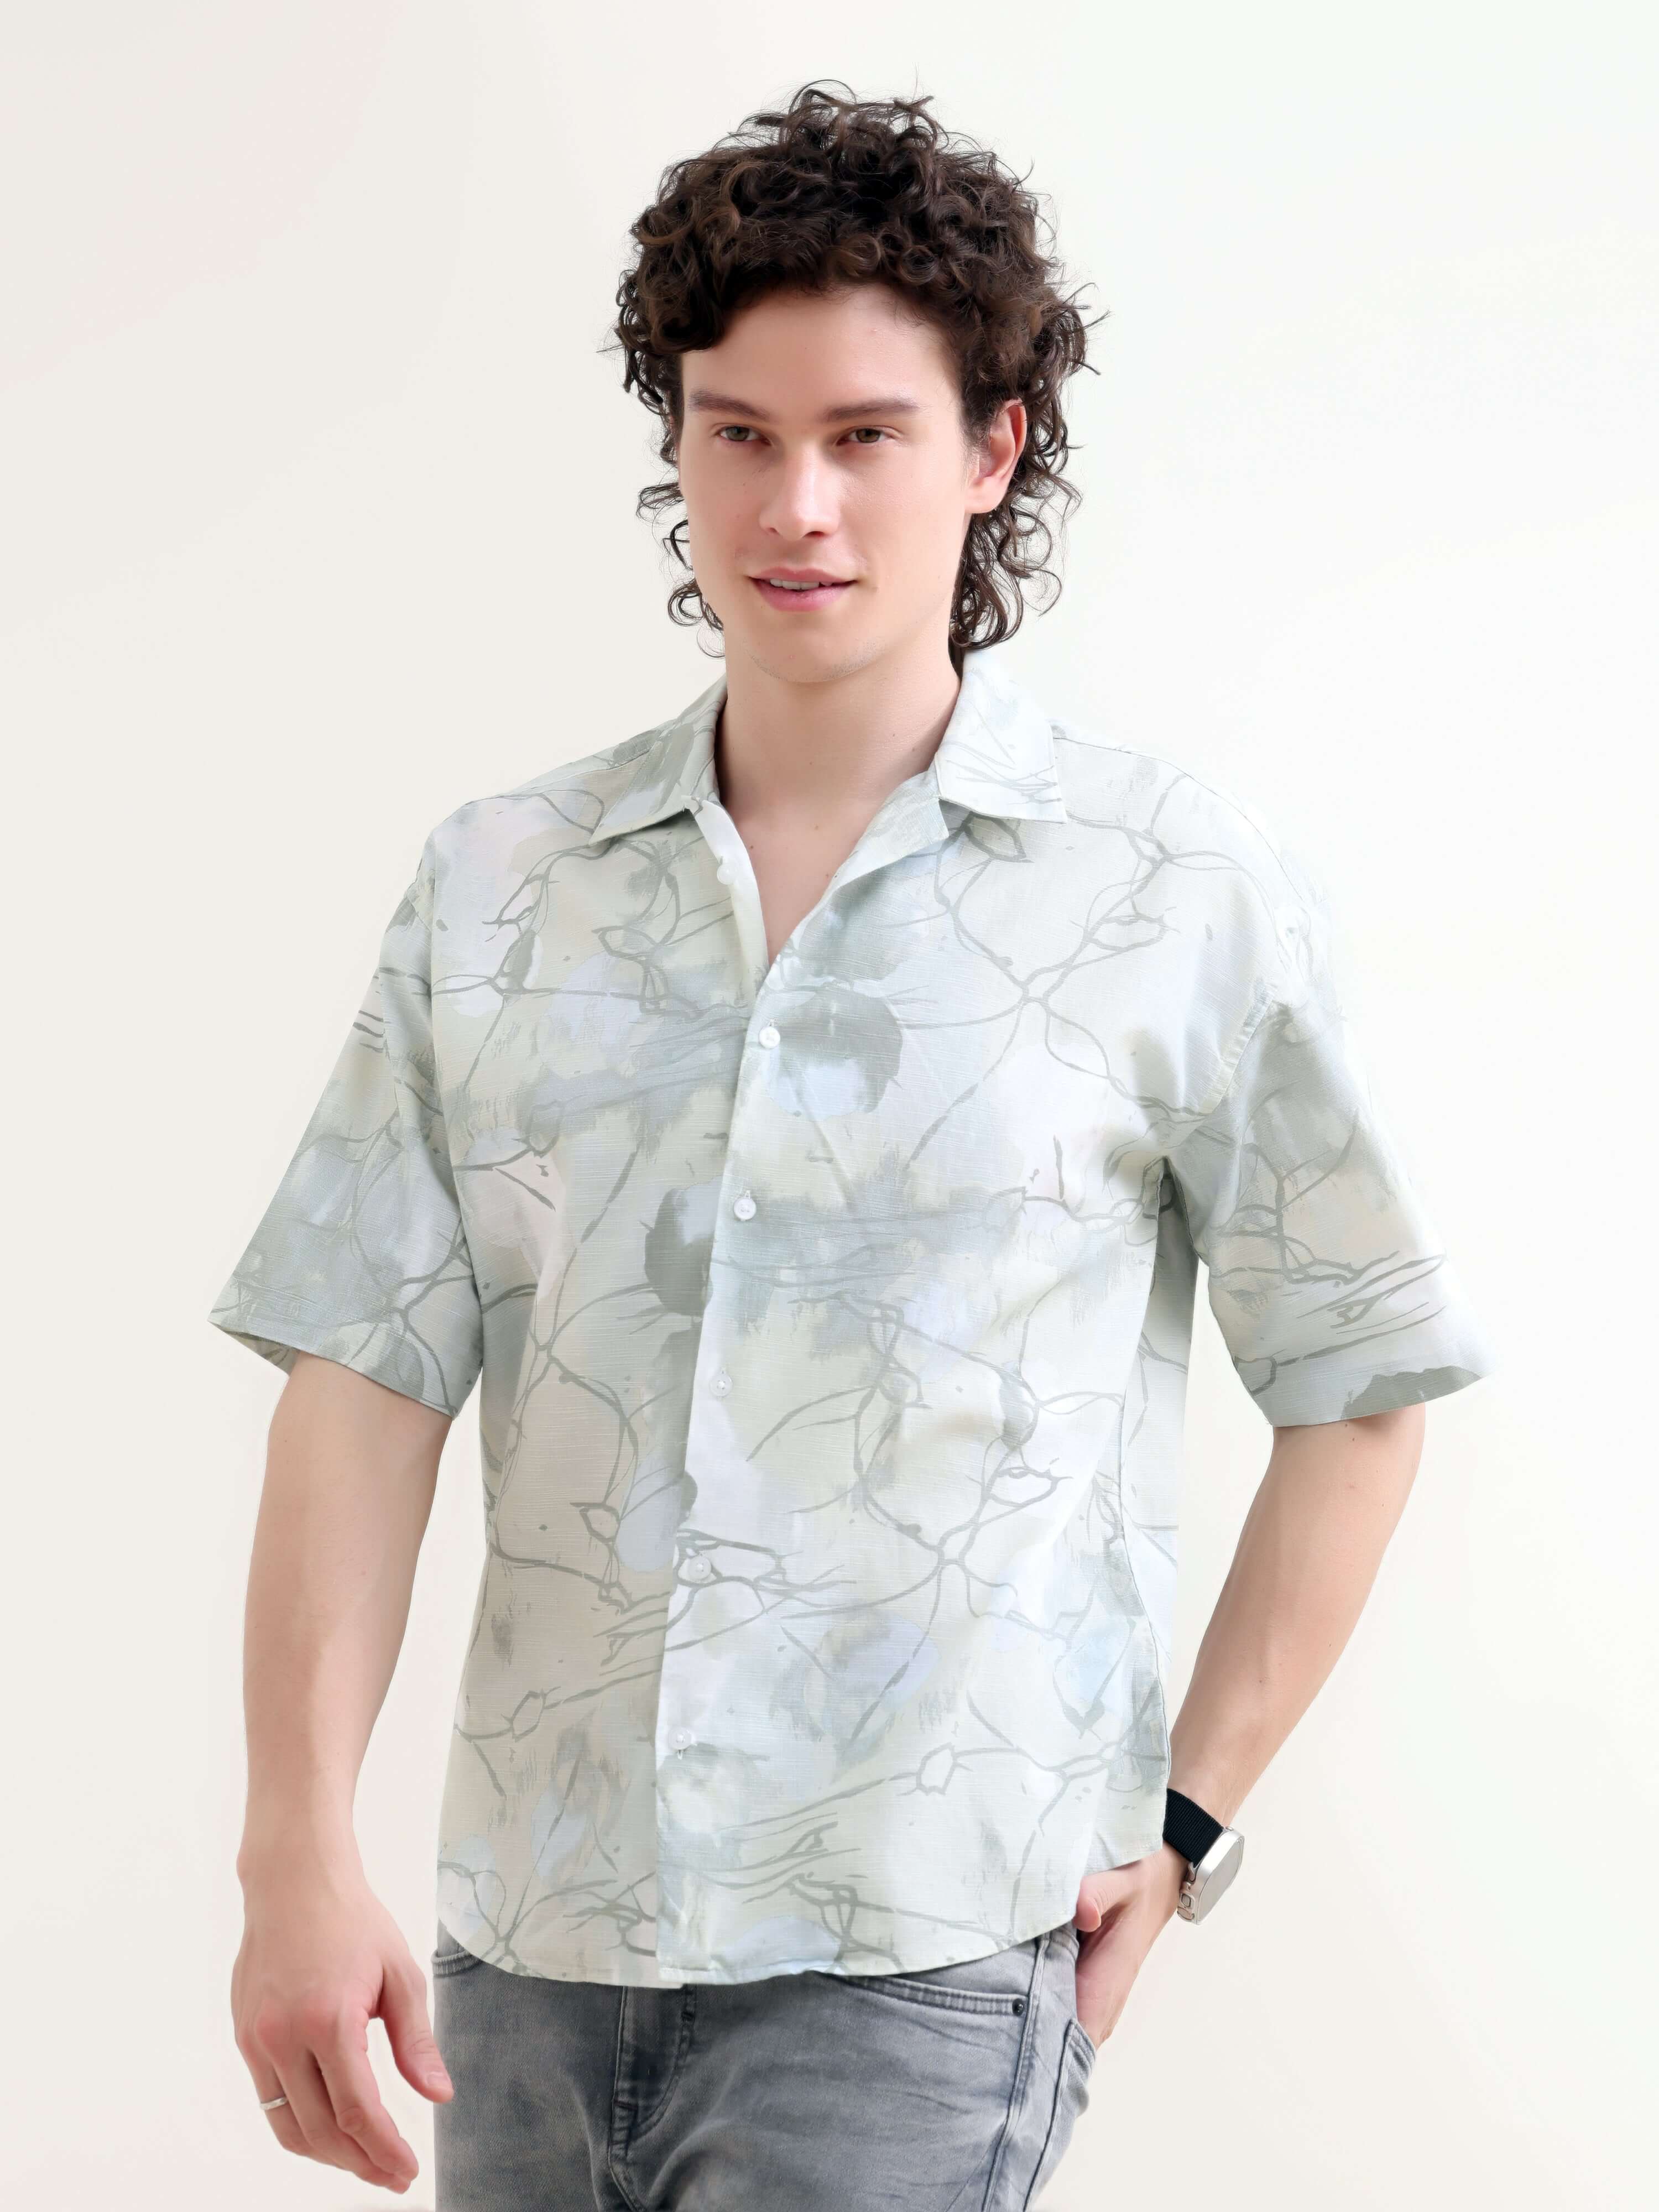 Mirajo Dusky Green Oversized Shirt - Men's Summer Wear shop online at Estilocus. Stay cool in our Mirajo dusky green shirt with a casual oversized fit, perfect for summer style. Shop new men's arrivals now!